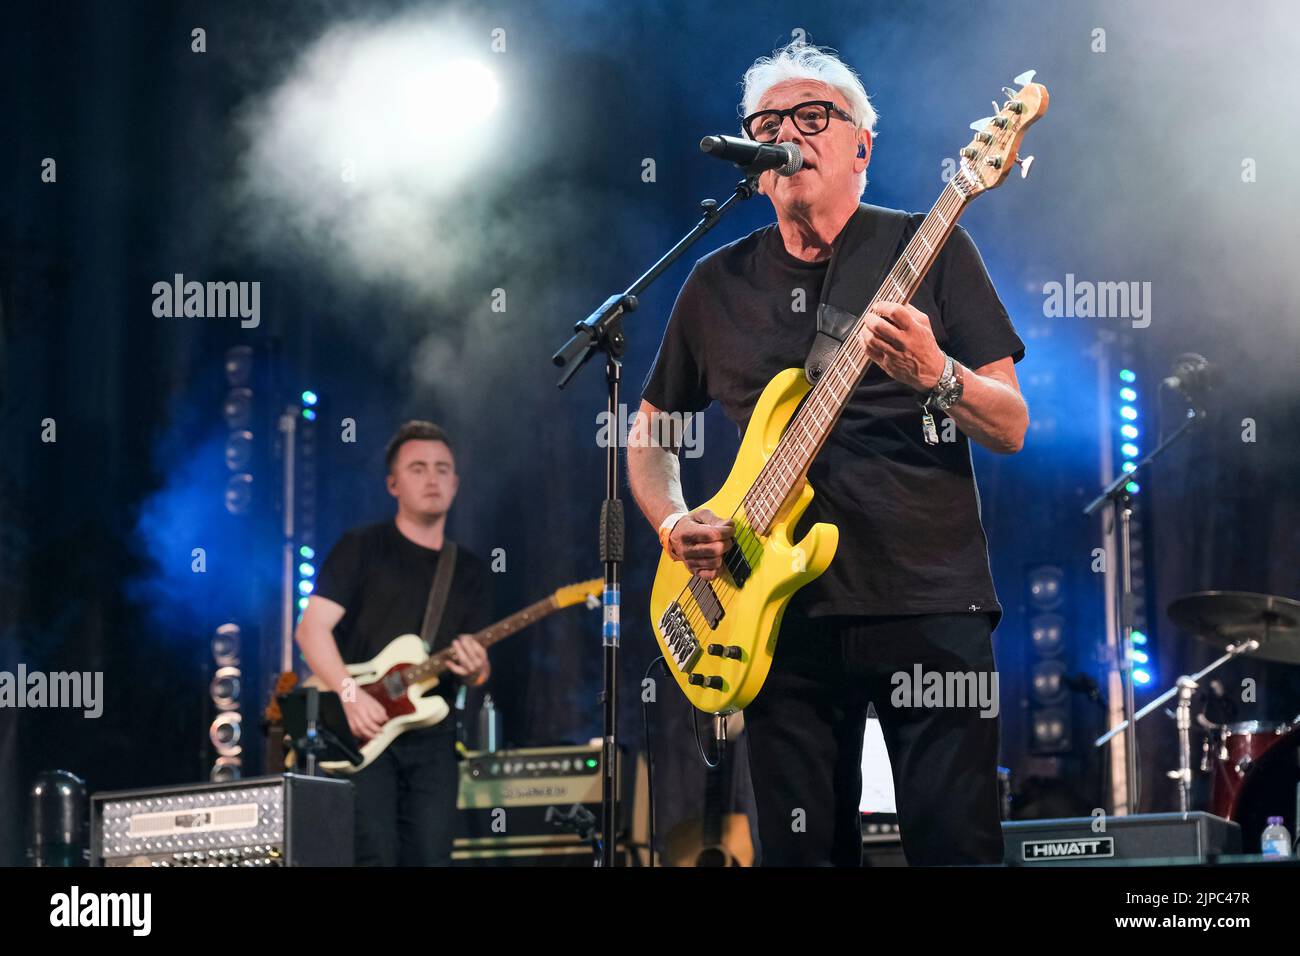 Trevor Horn performing at Fairport's Cropredy Convention. Banbury, UK. August 11, 2022 Stock Photo